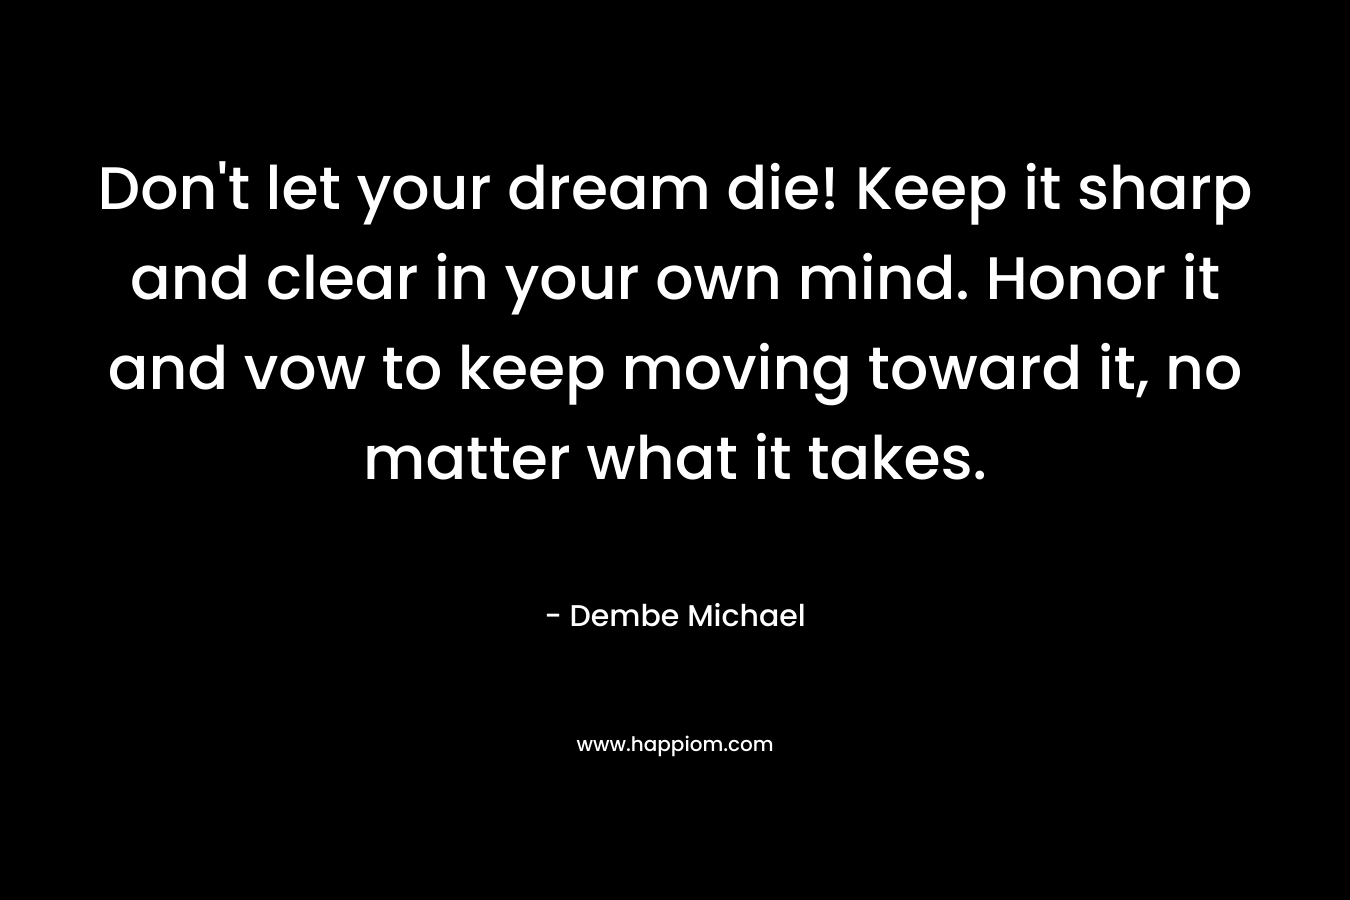 Don’t let your dream die! Keep it sharp and clear in your own mind. Honor it and vow to keep moving toward it, no matter what it takes. – Dembe Michael